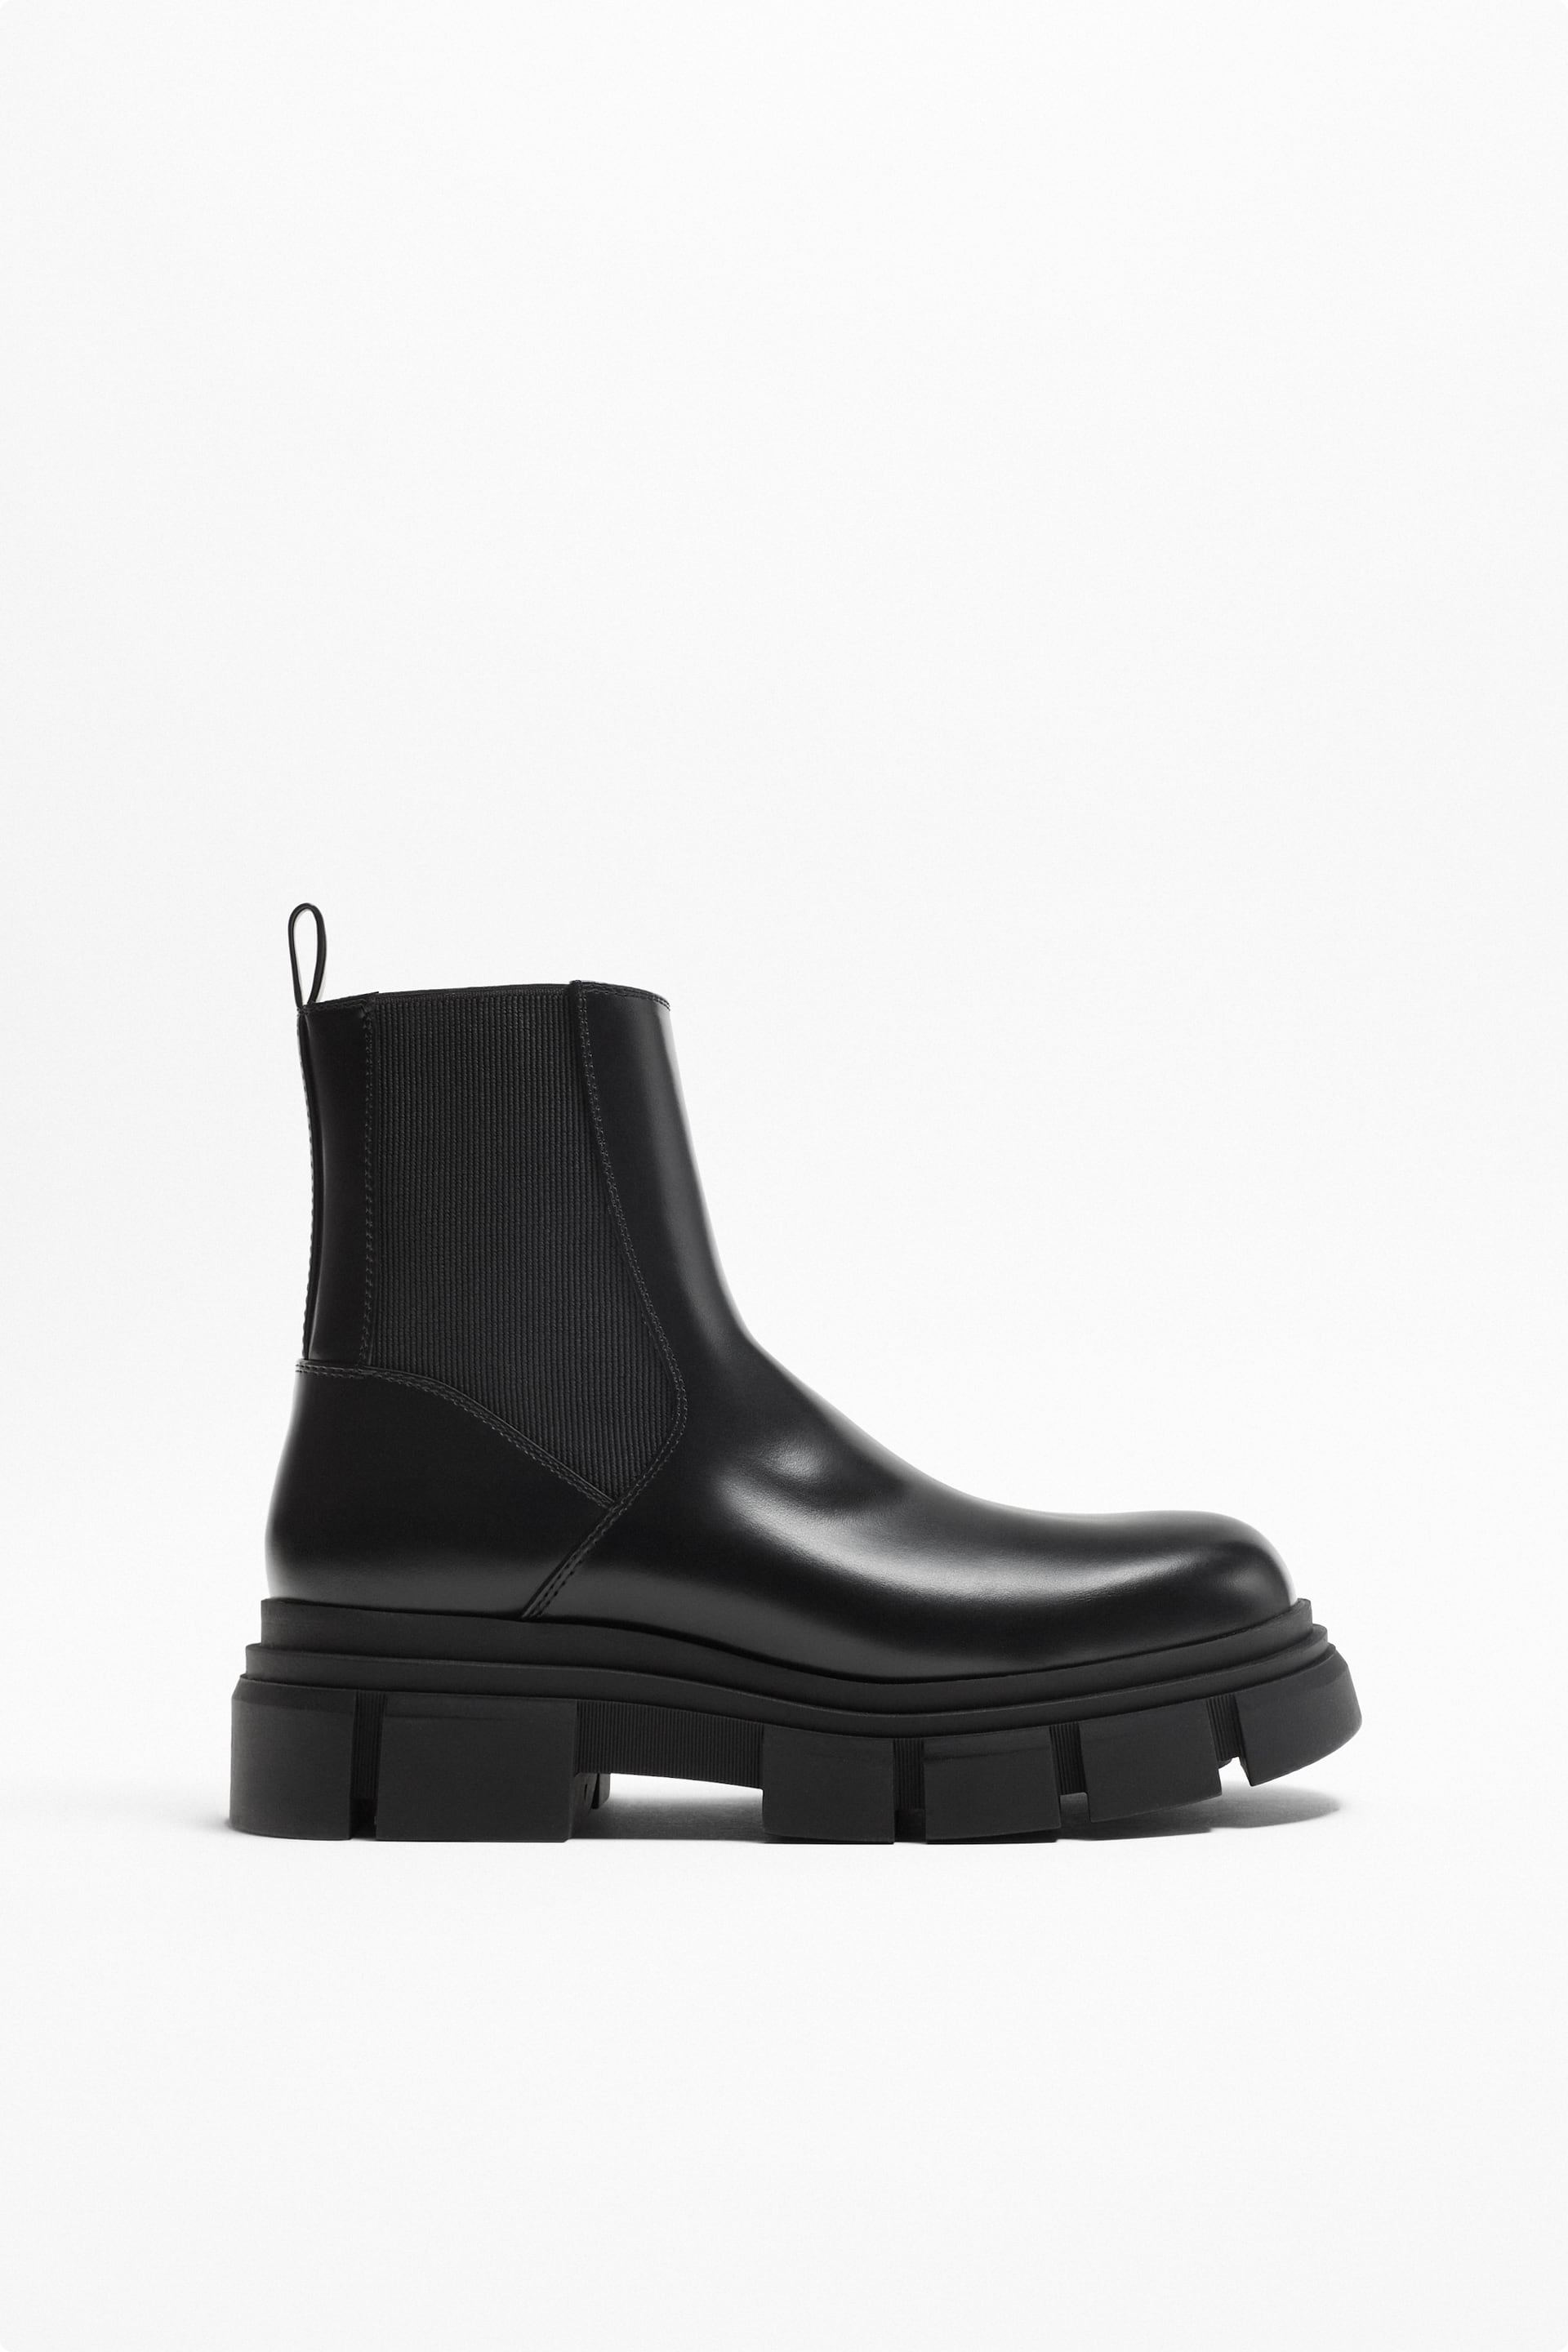 Infant screen poverty THICK SOLED CHUNKY CHELSEA BOOTS - Black | ZARA United States